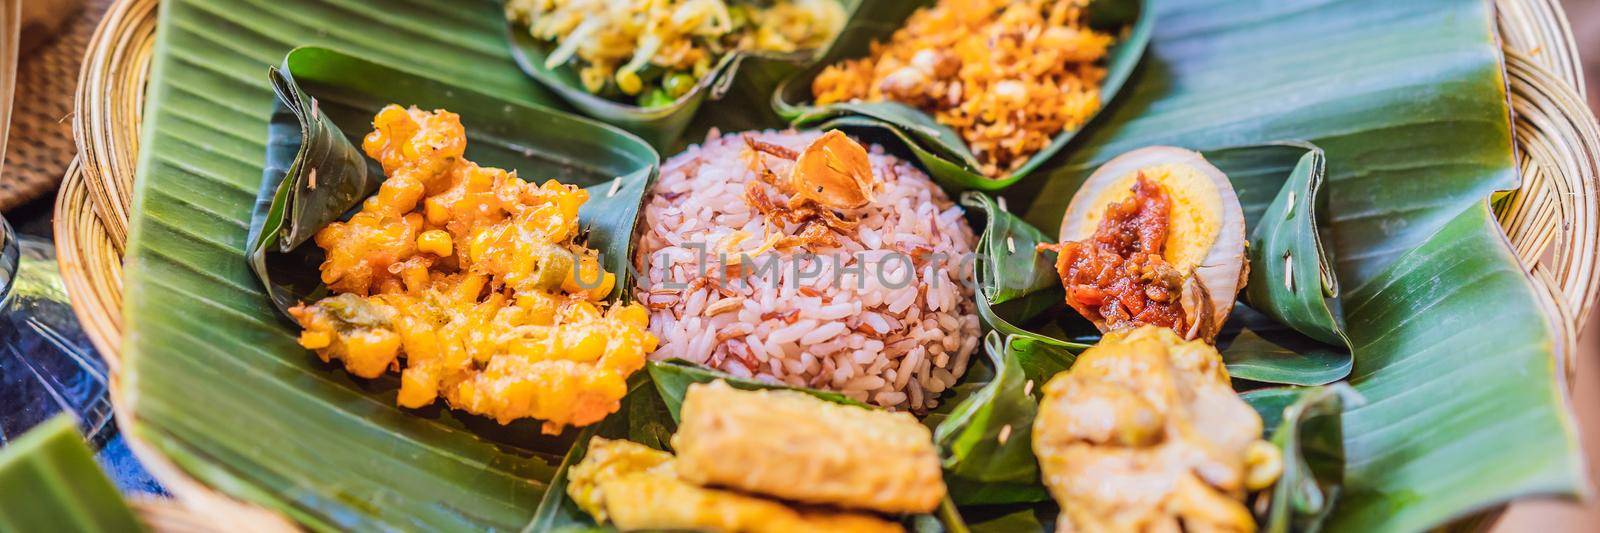 Nasi lemak, Nasi campur, Indonesian Balinese rice with potato fritter, sate lilit, fried tofu, spicy boiled eggs, and peanut. BANNER, LONG FORMAT